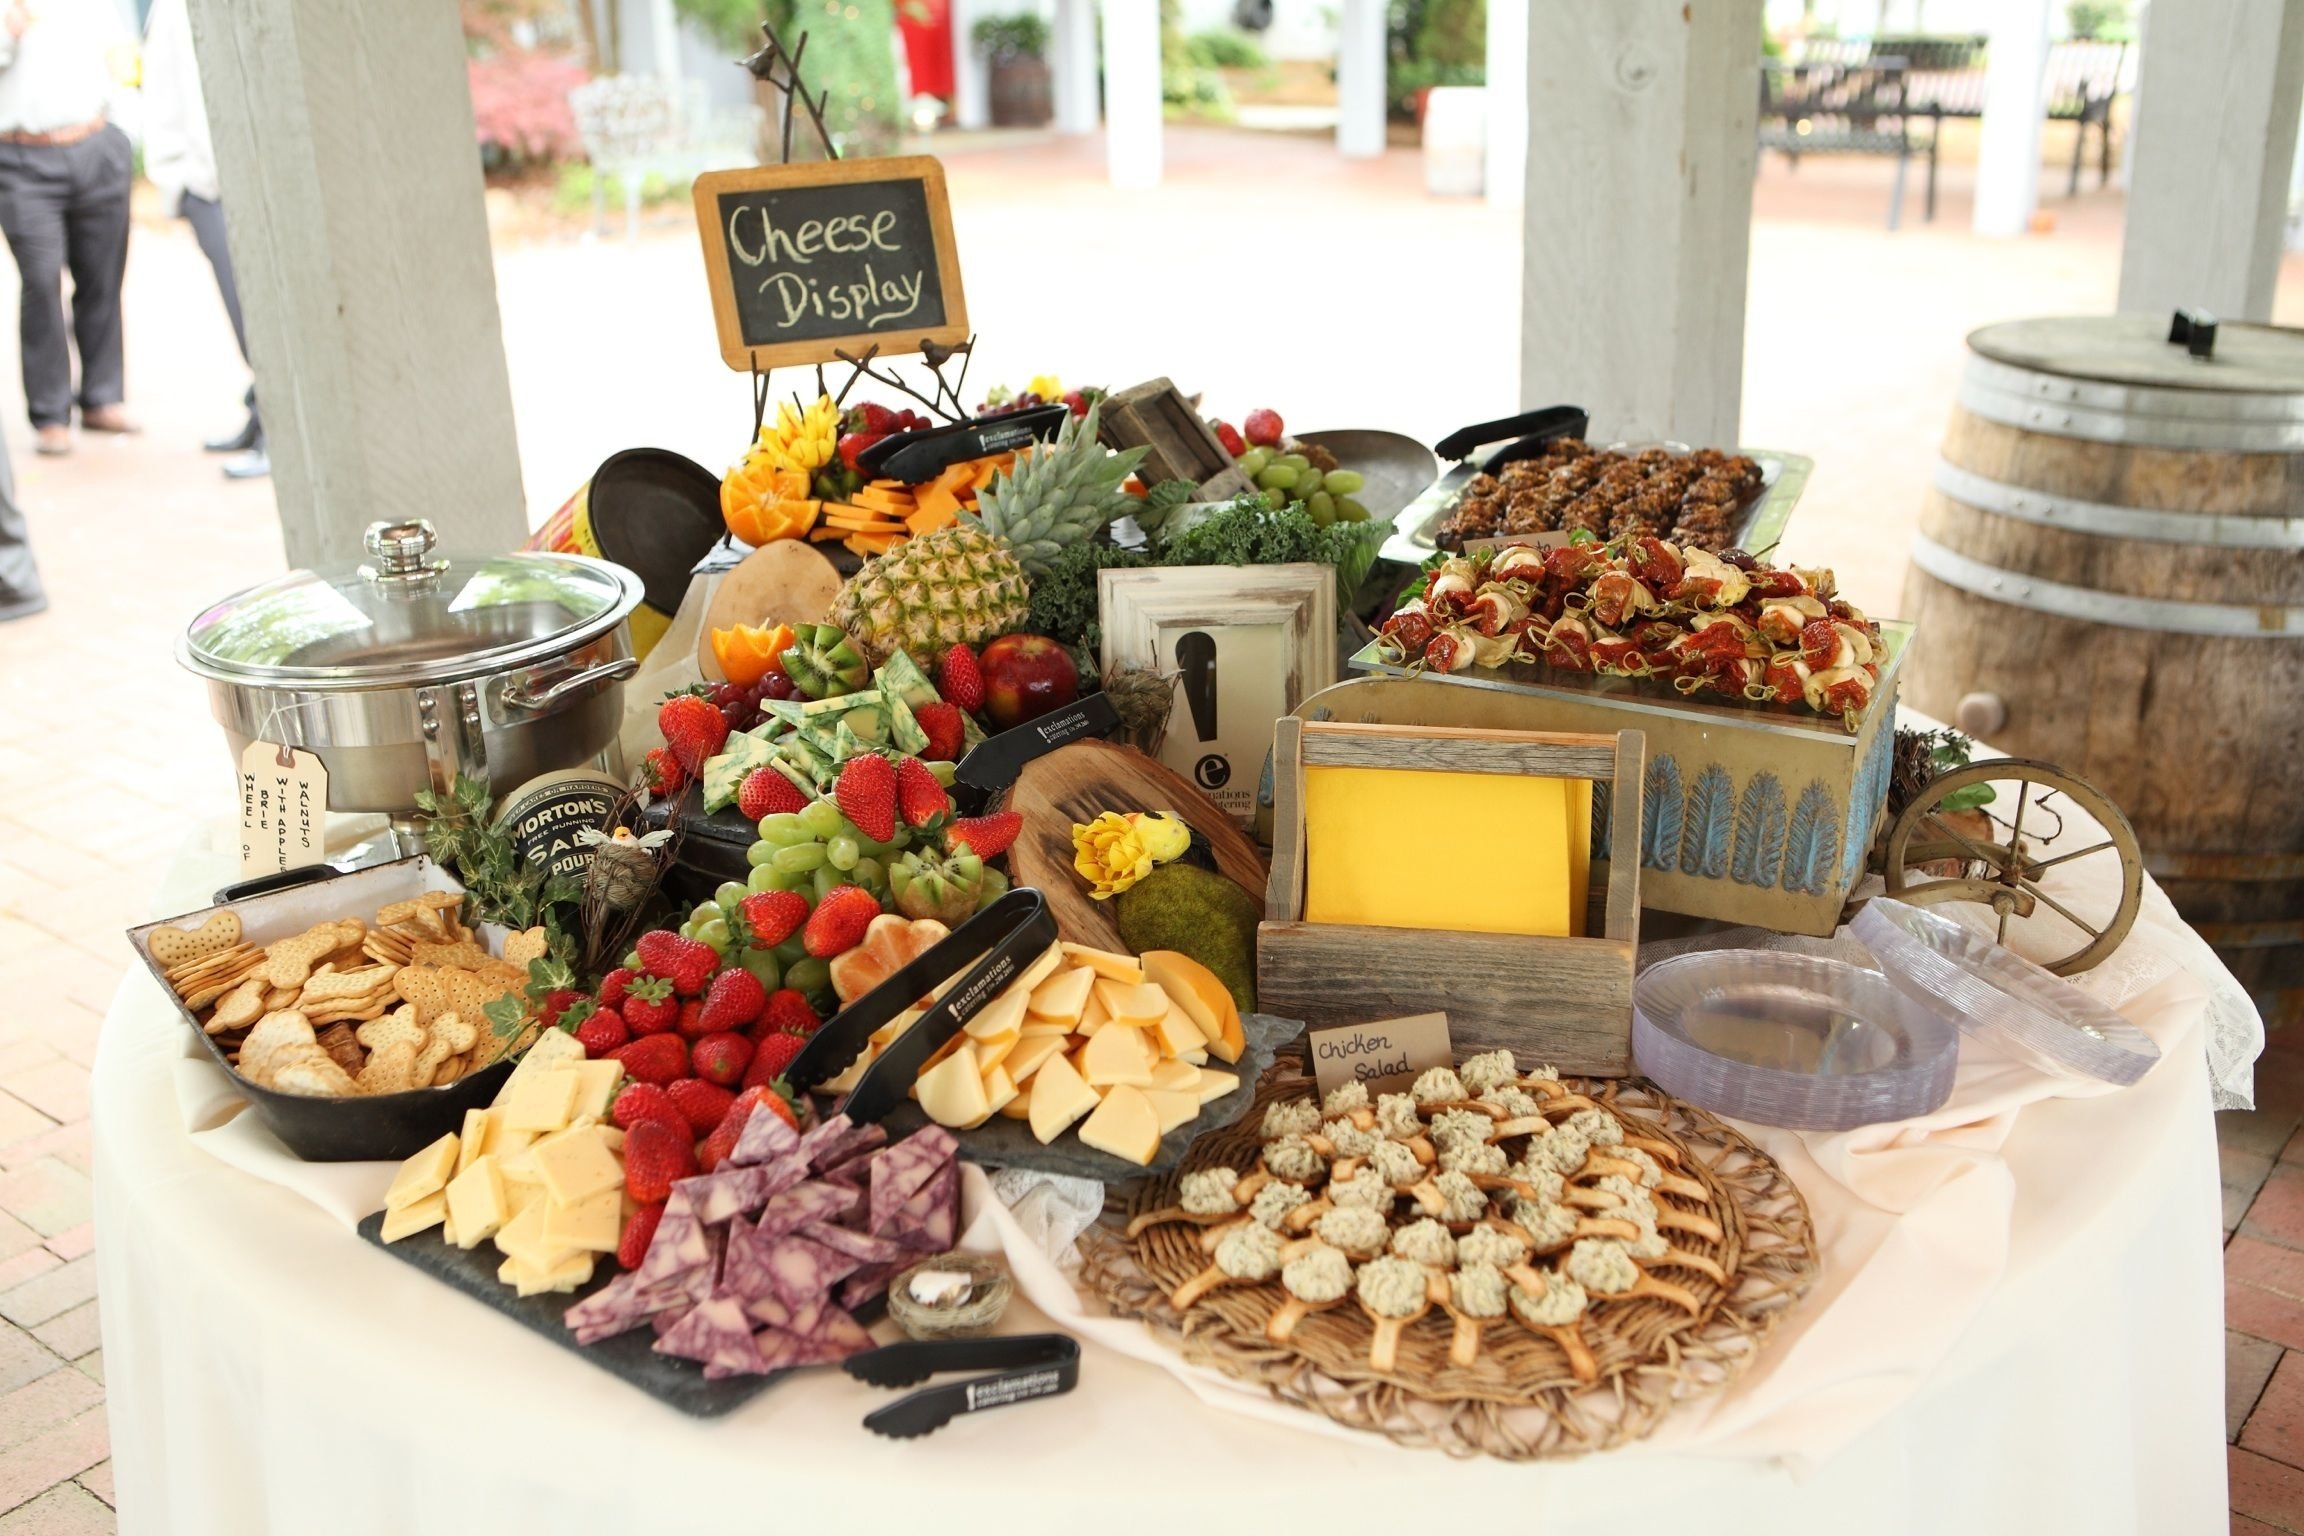 10 Beautiful Food Ideas For Wedding Reception perfect display of cheese crackers fruit finger foods etc for a 1 2022